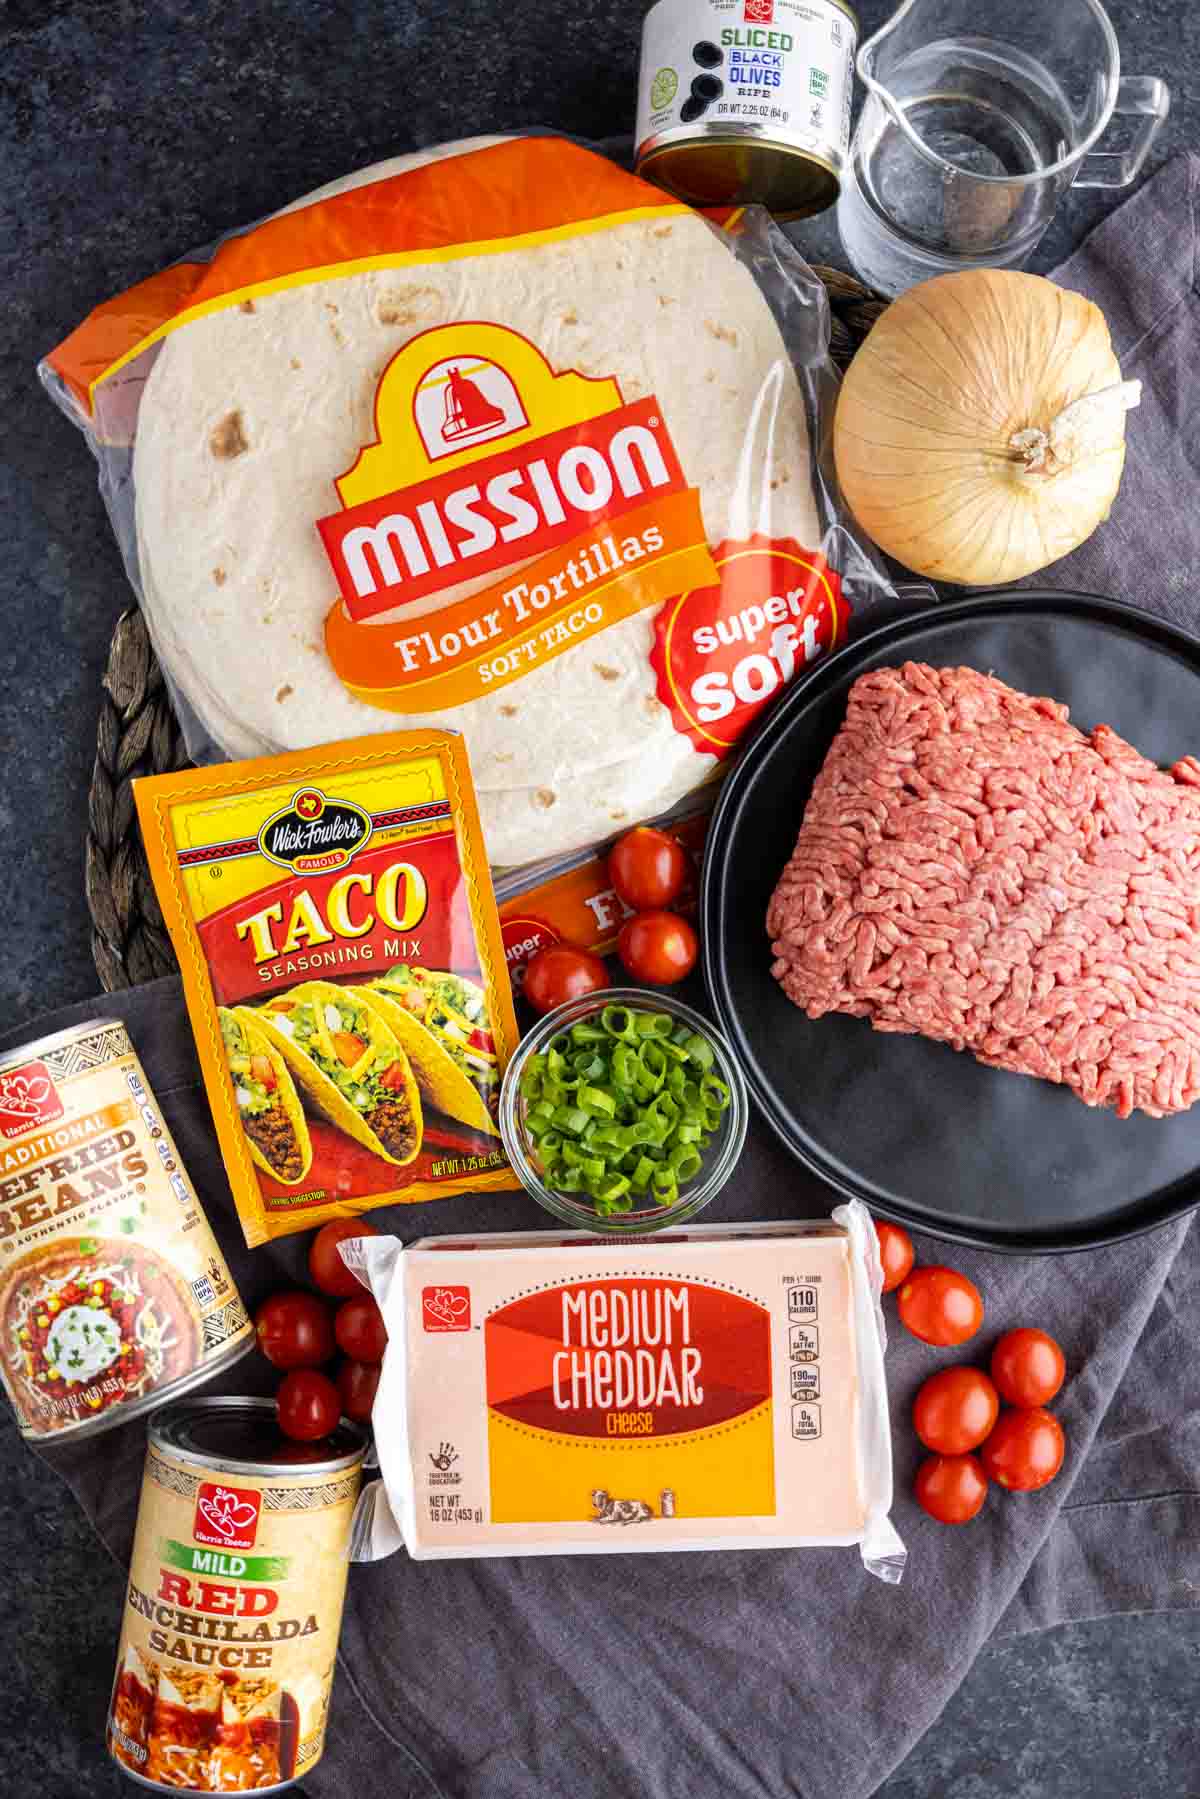 Taco Bell Mexican Pizza ingredients